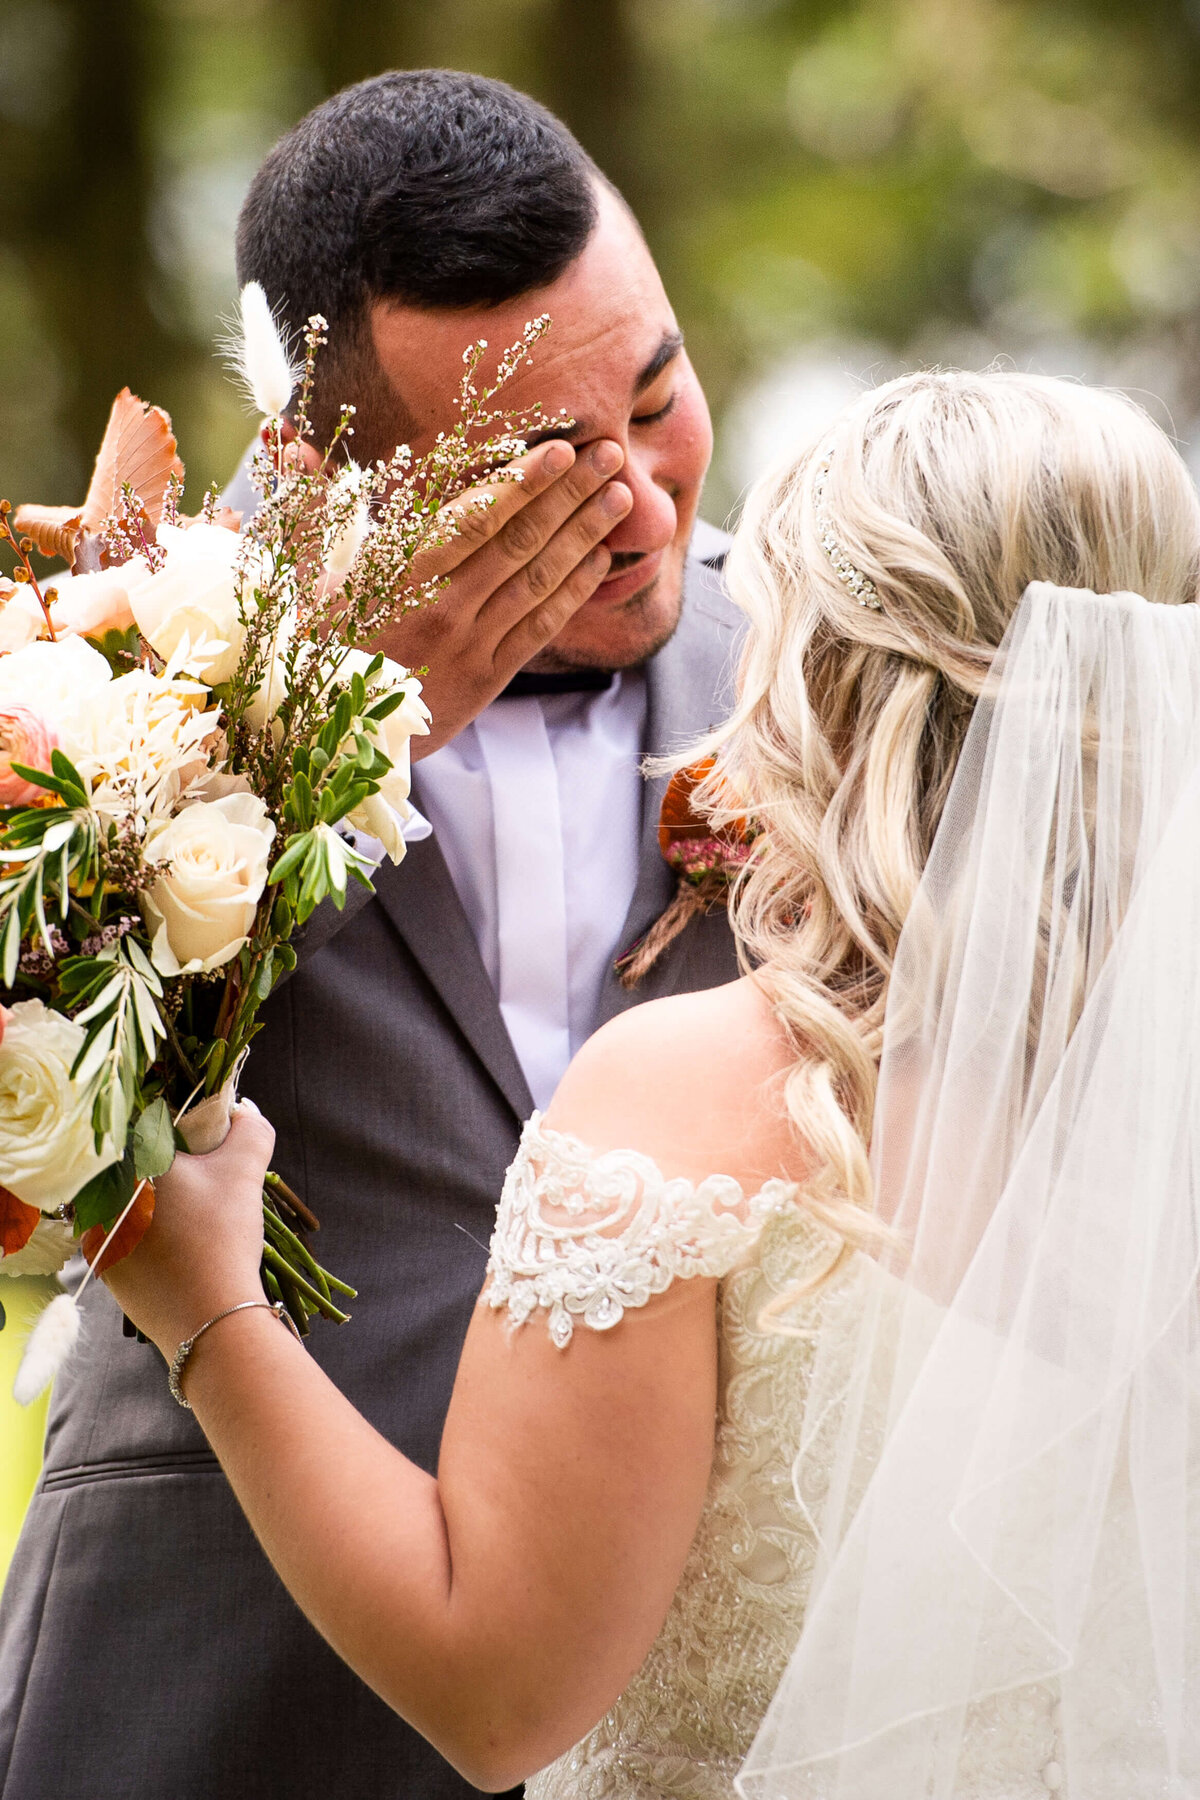 Ottawa wedding photography of a groom in a grey suit wiping a tear away as he sees his bride for the first time